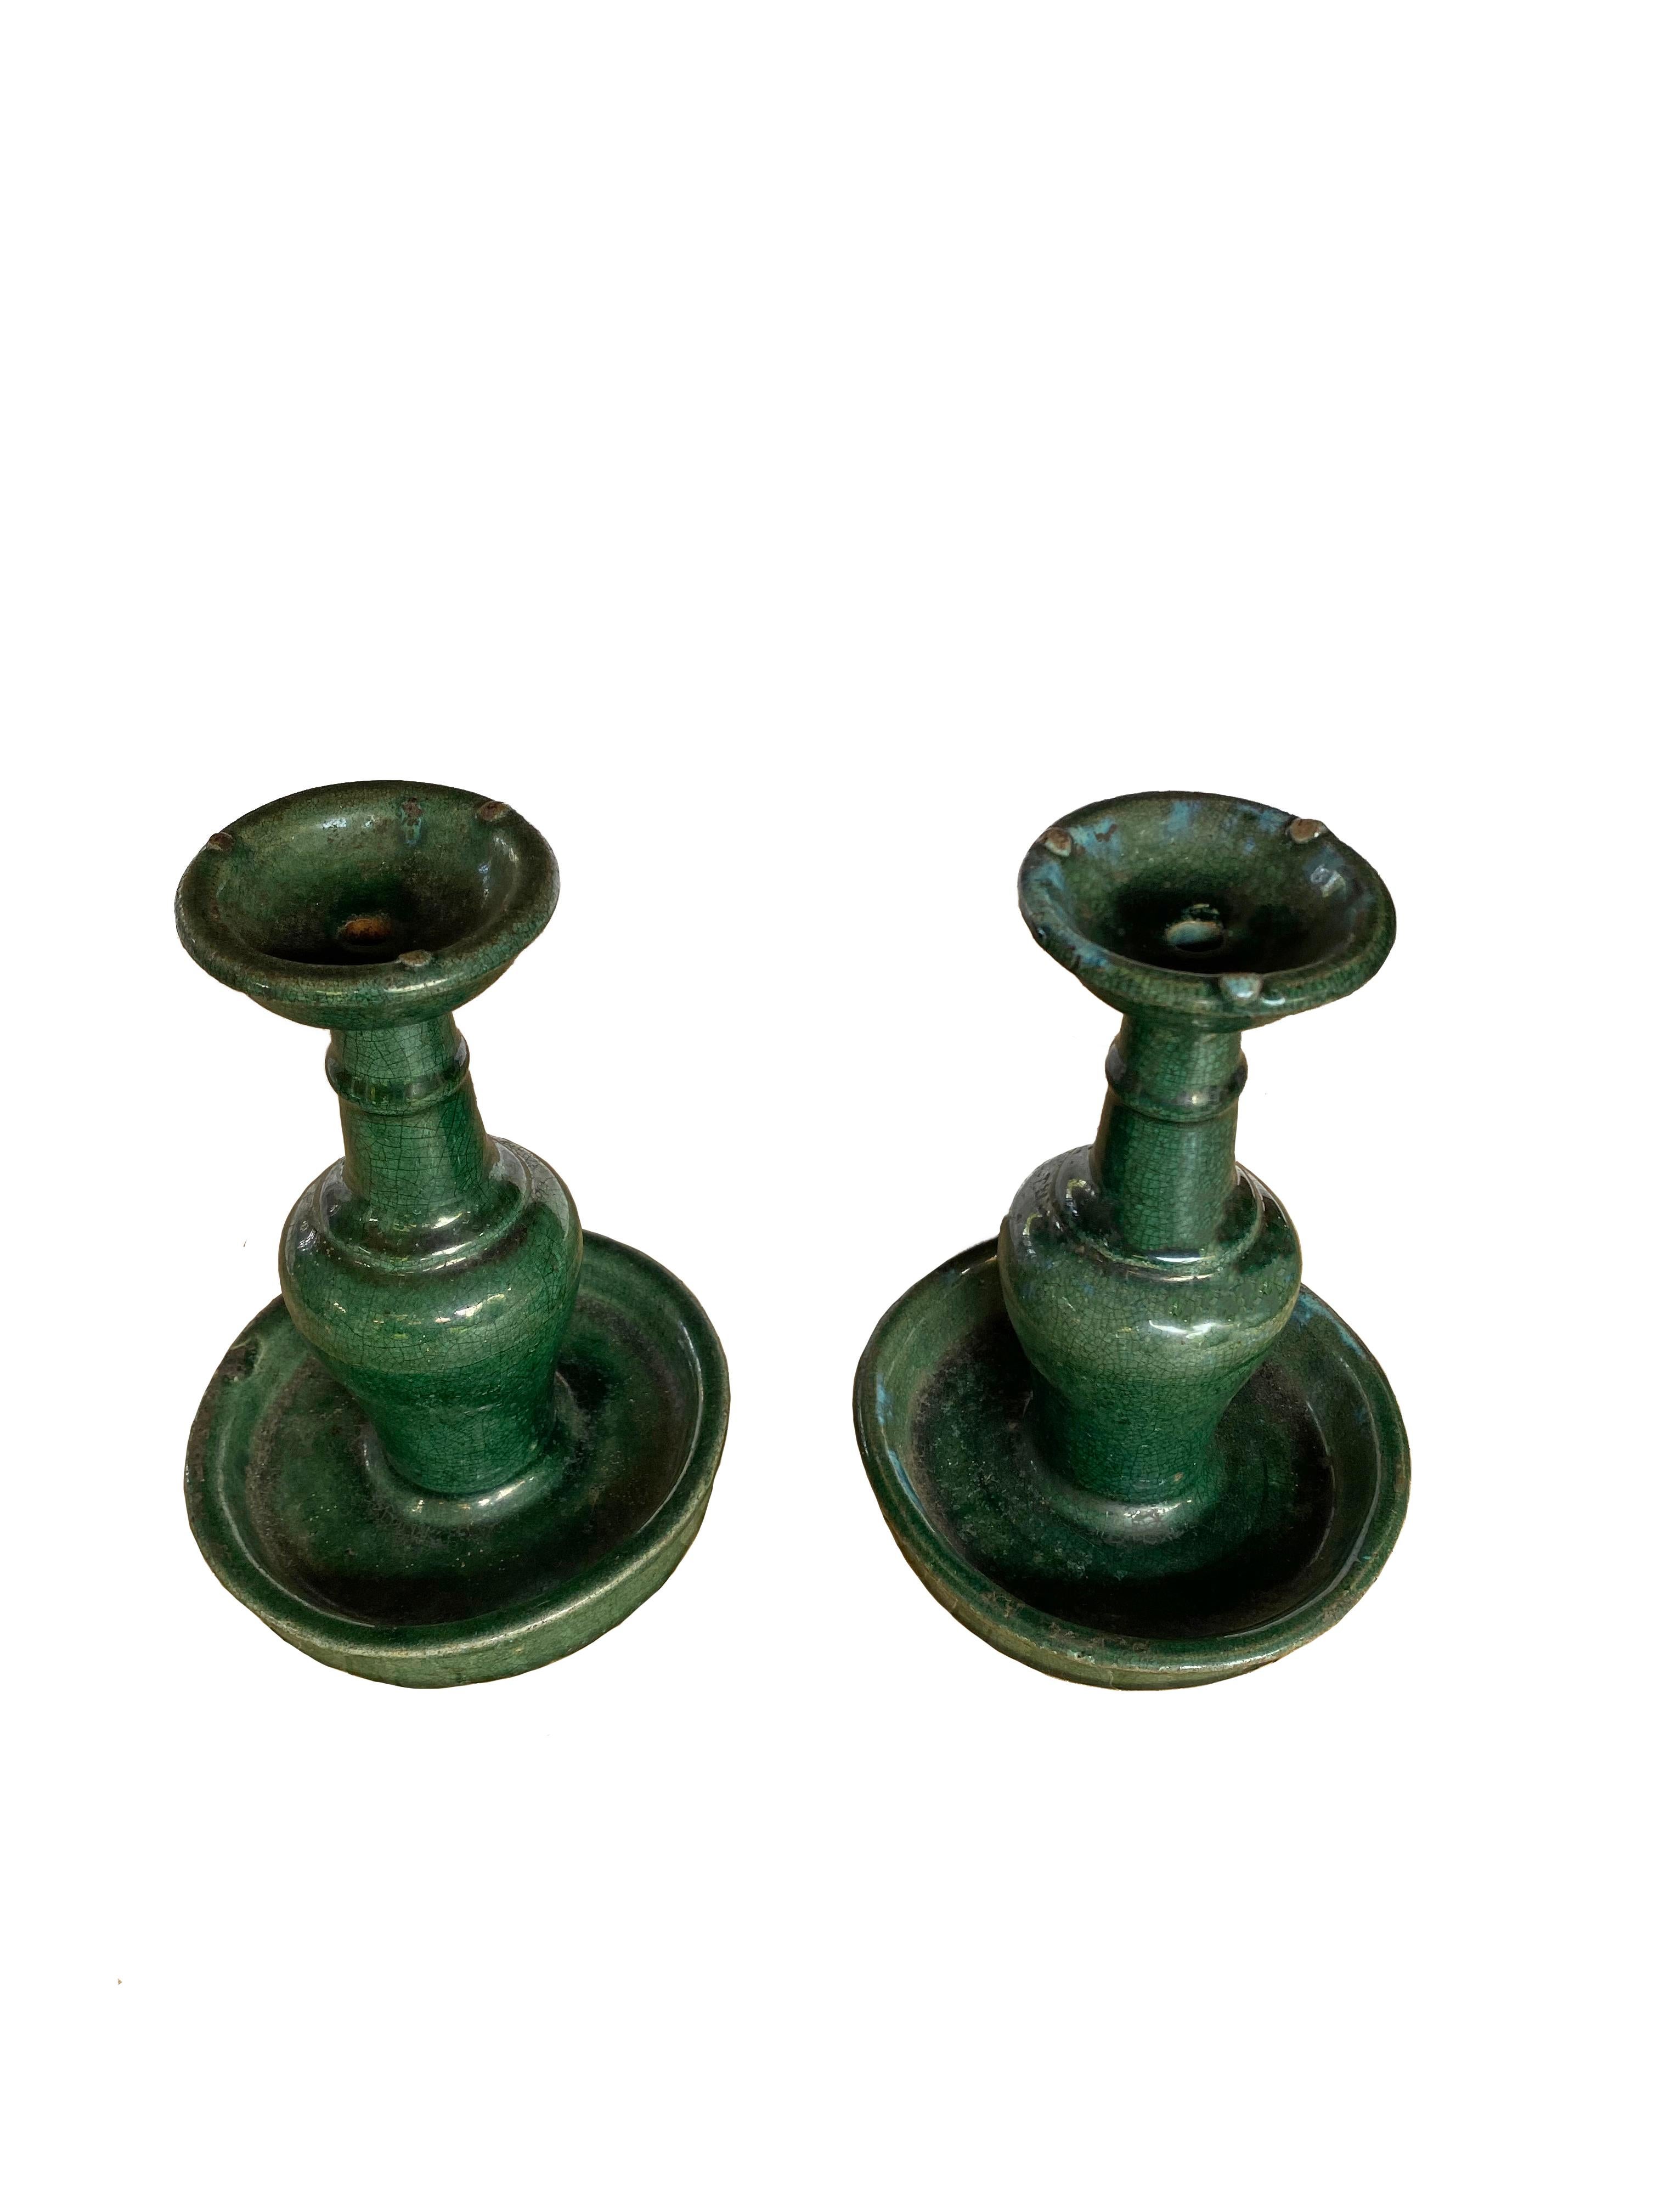 This set of Shiwan ware oil lamps from the early 20th century features the distinctive green glaze. Shiwan ware is a style of Chinese pottery from the Shiwanzhen district near Guangdong, China. 

Measures: Diameter 13cm x Height 17cm.
   